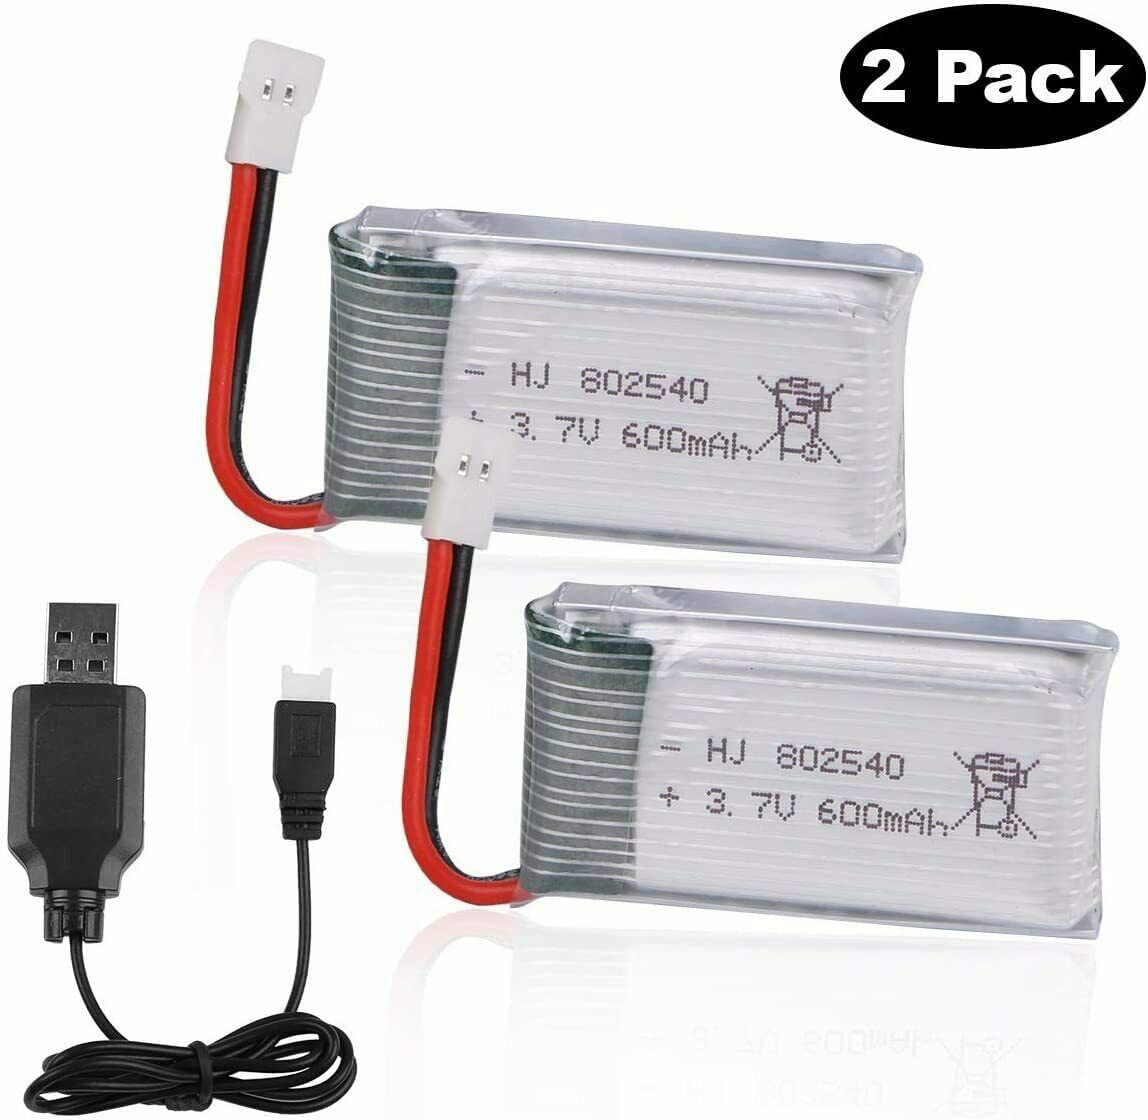 Hootracker 3.7V 1800mah Lipo Battery 25C XH2.54 Plug with USB Charger for RC Quadcopter Drone 